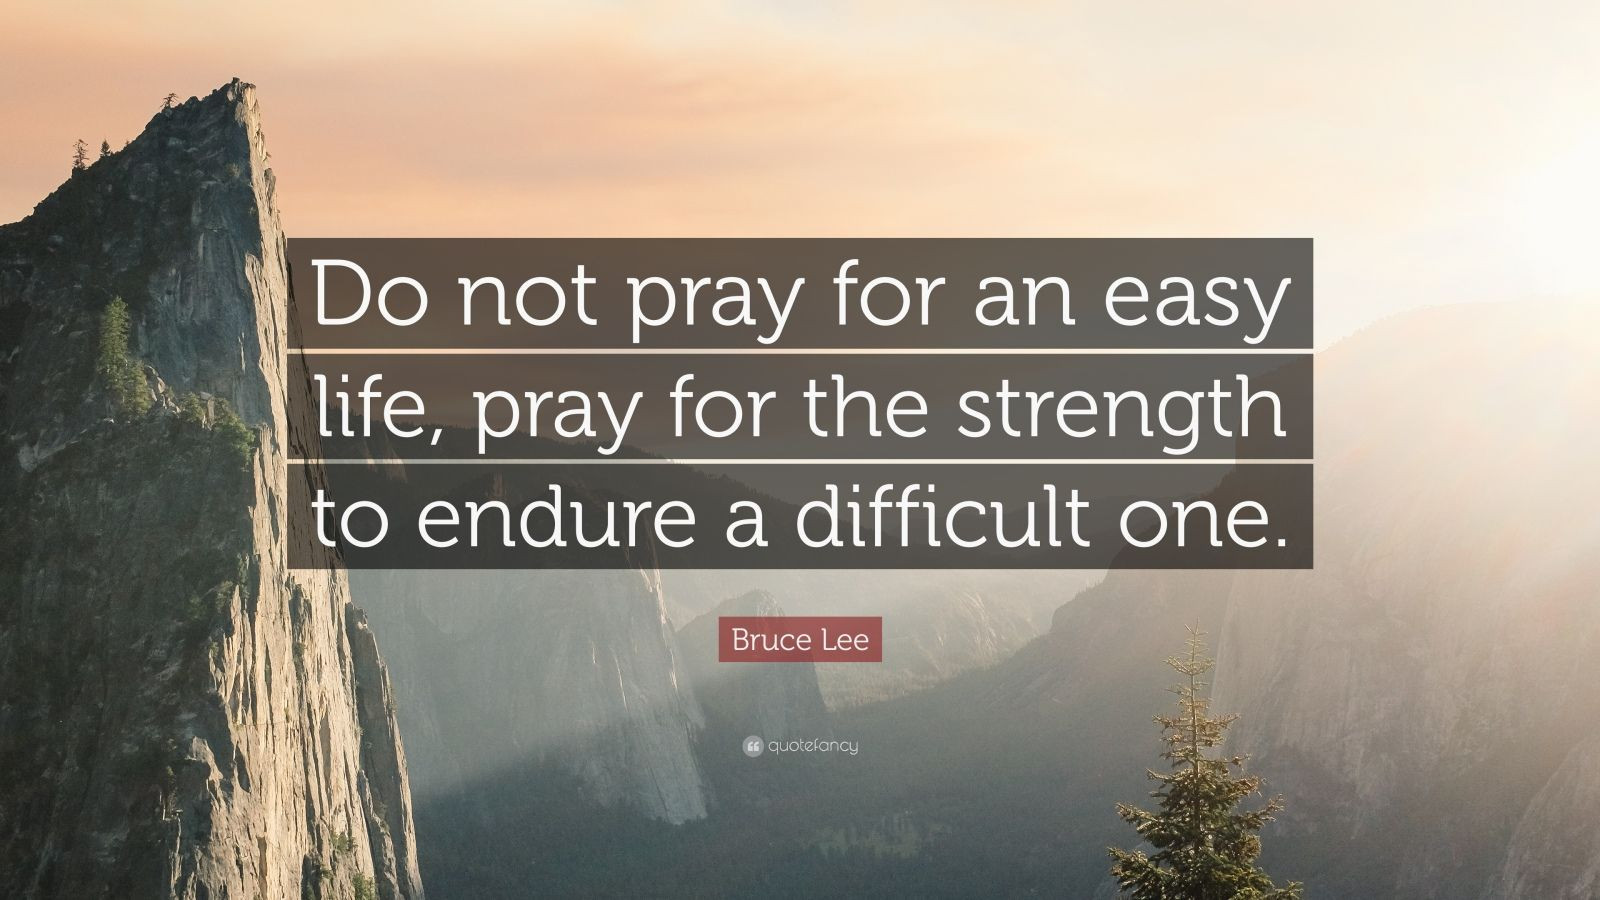 Easy Life Quotes
 Bruce Lee Quote “Do not pray for an easy life pray for